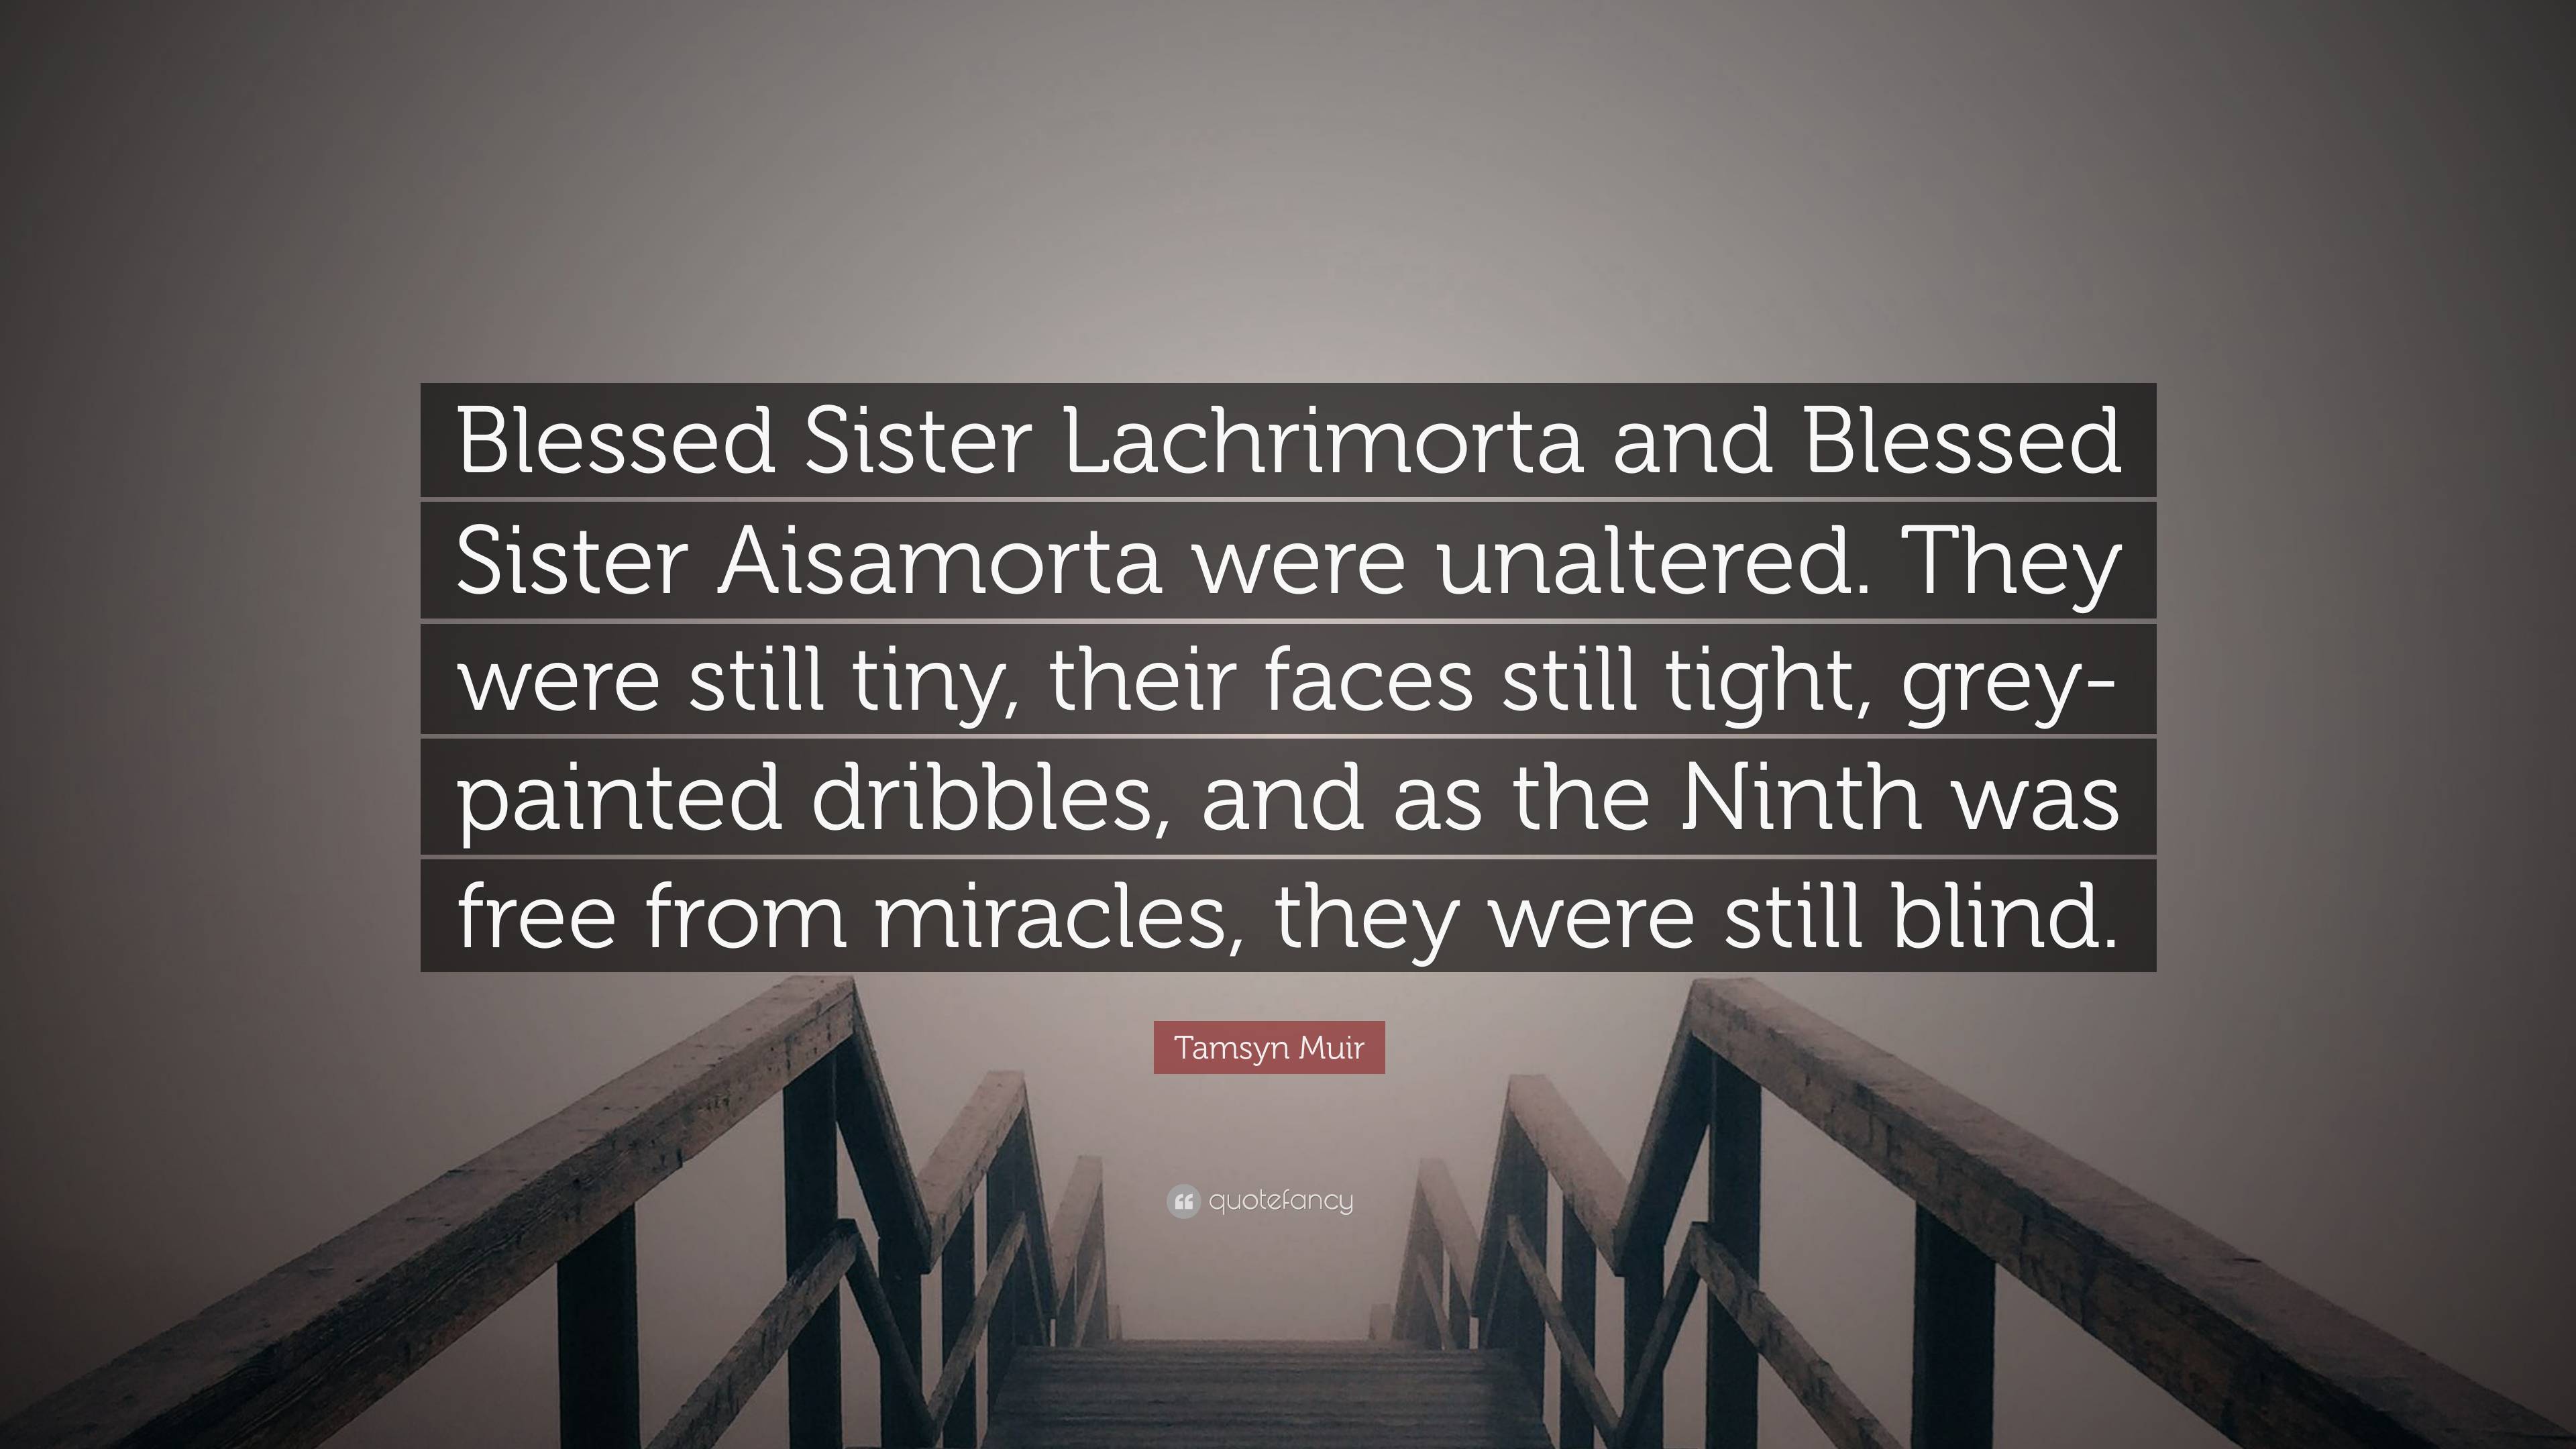 Tamsyn Muir Quote: “Blessed Sister Lachrimorta and Blessed Sister